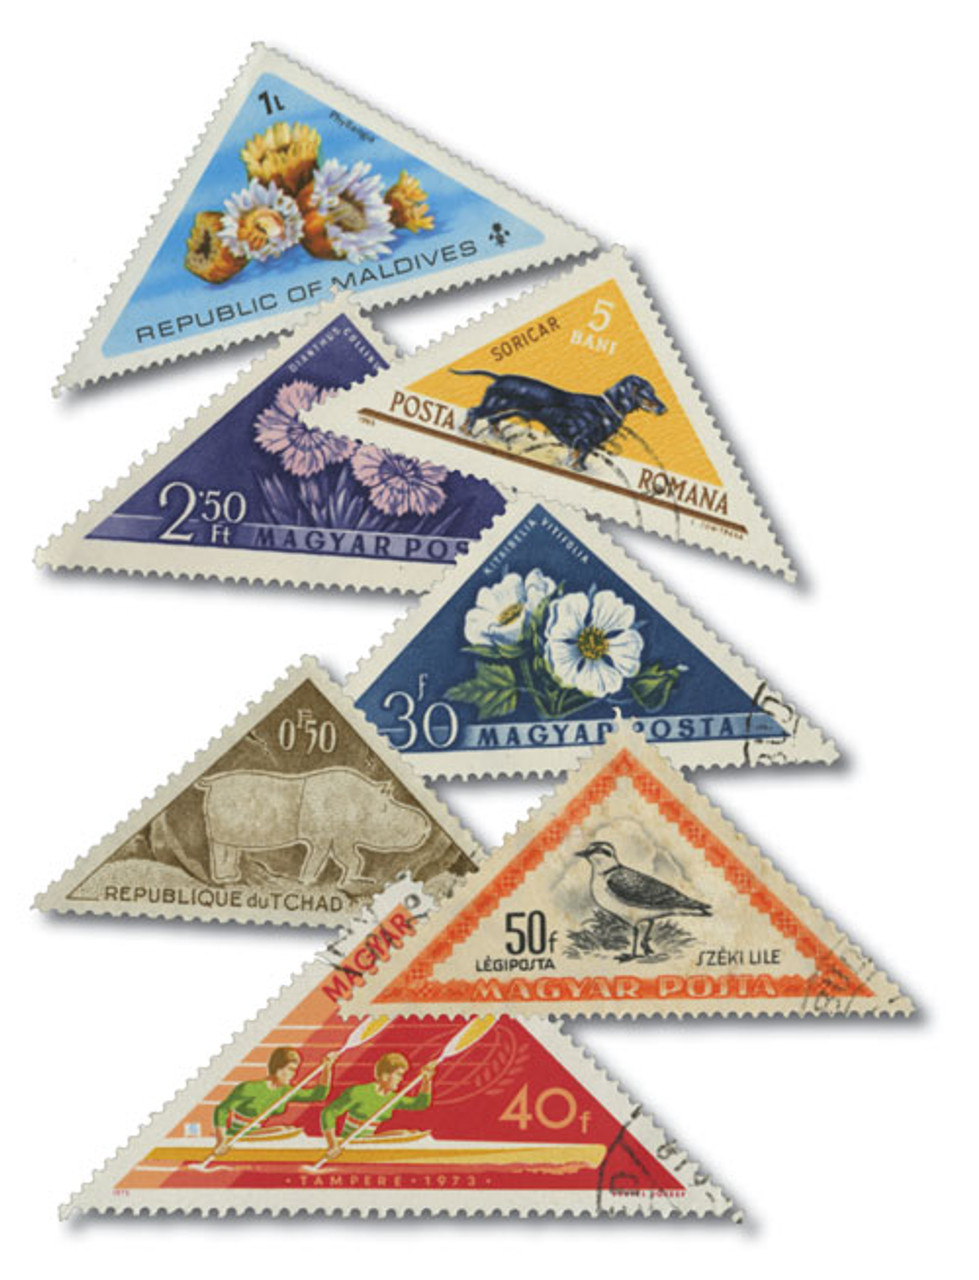 MP1944 - Triangle shaped stamps, 50v - Mystic Stamp Company